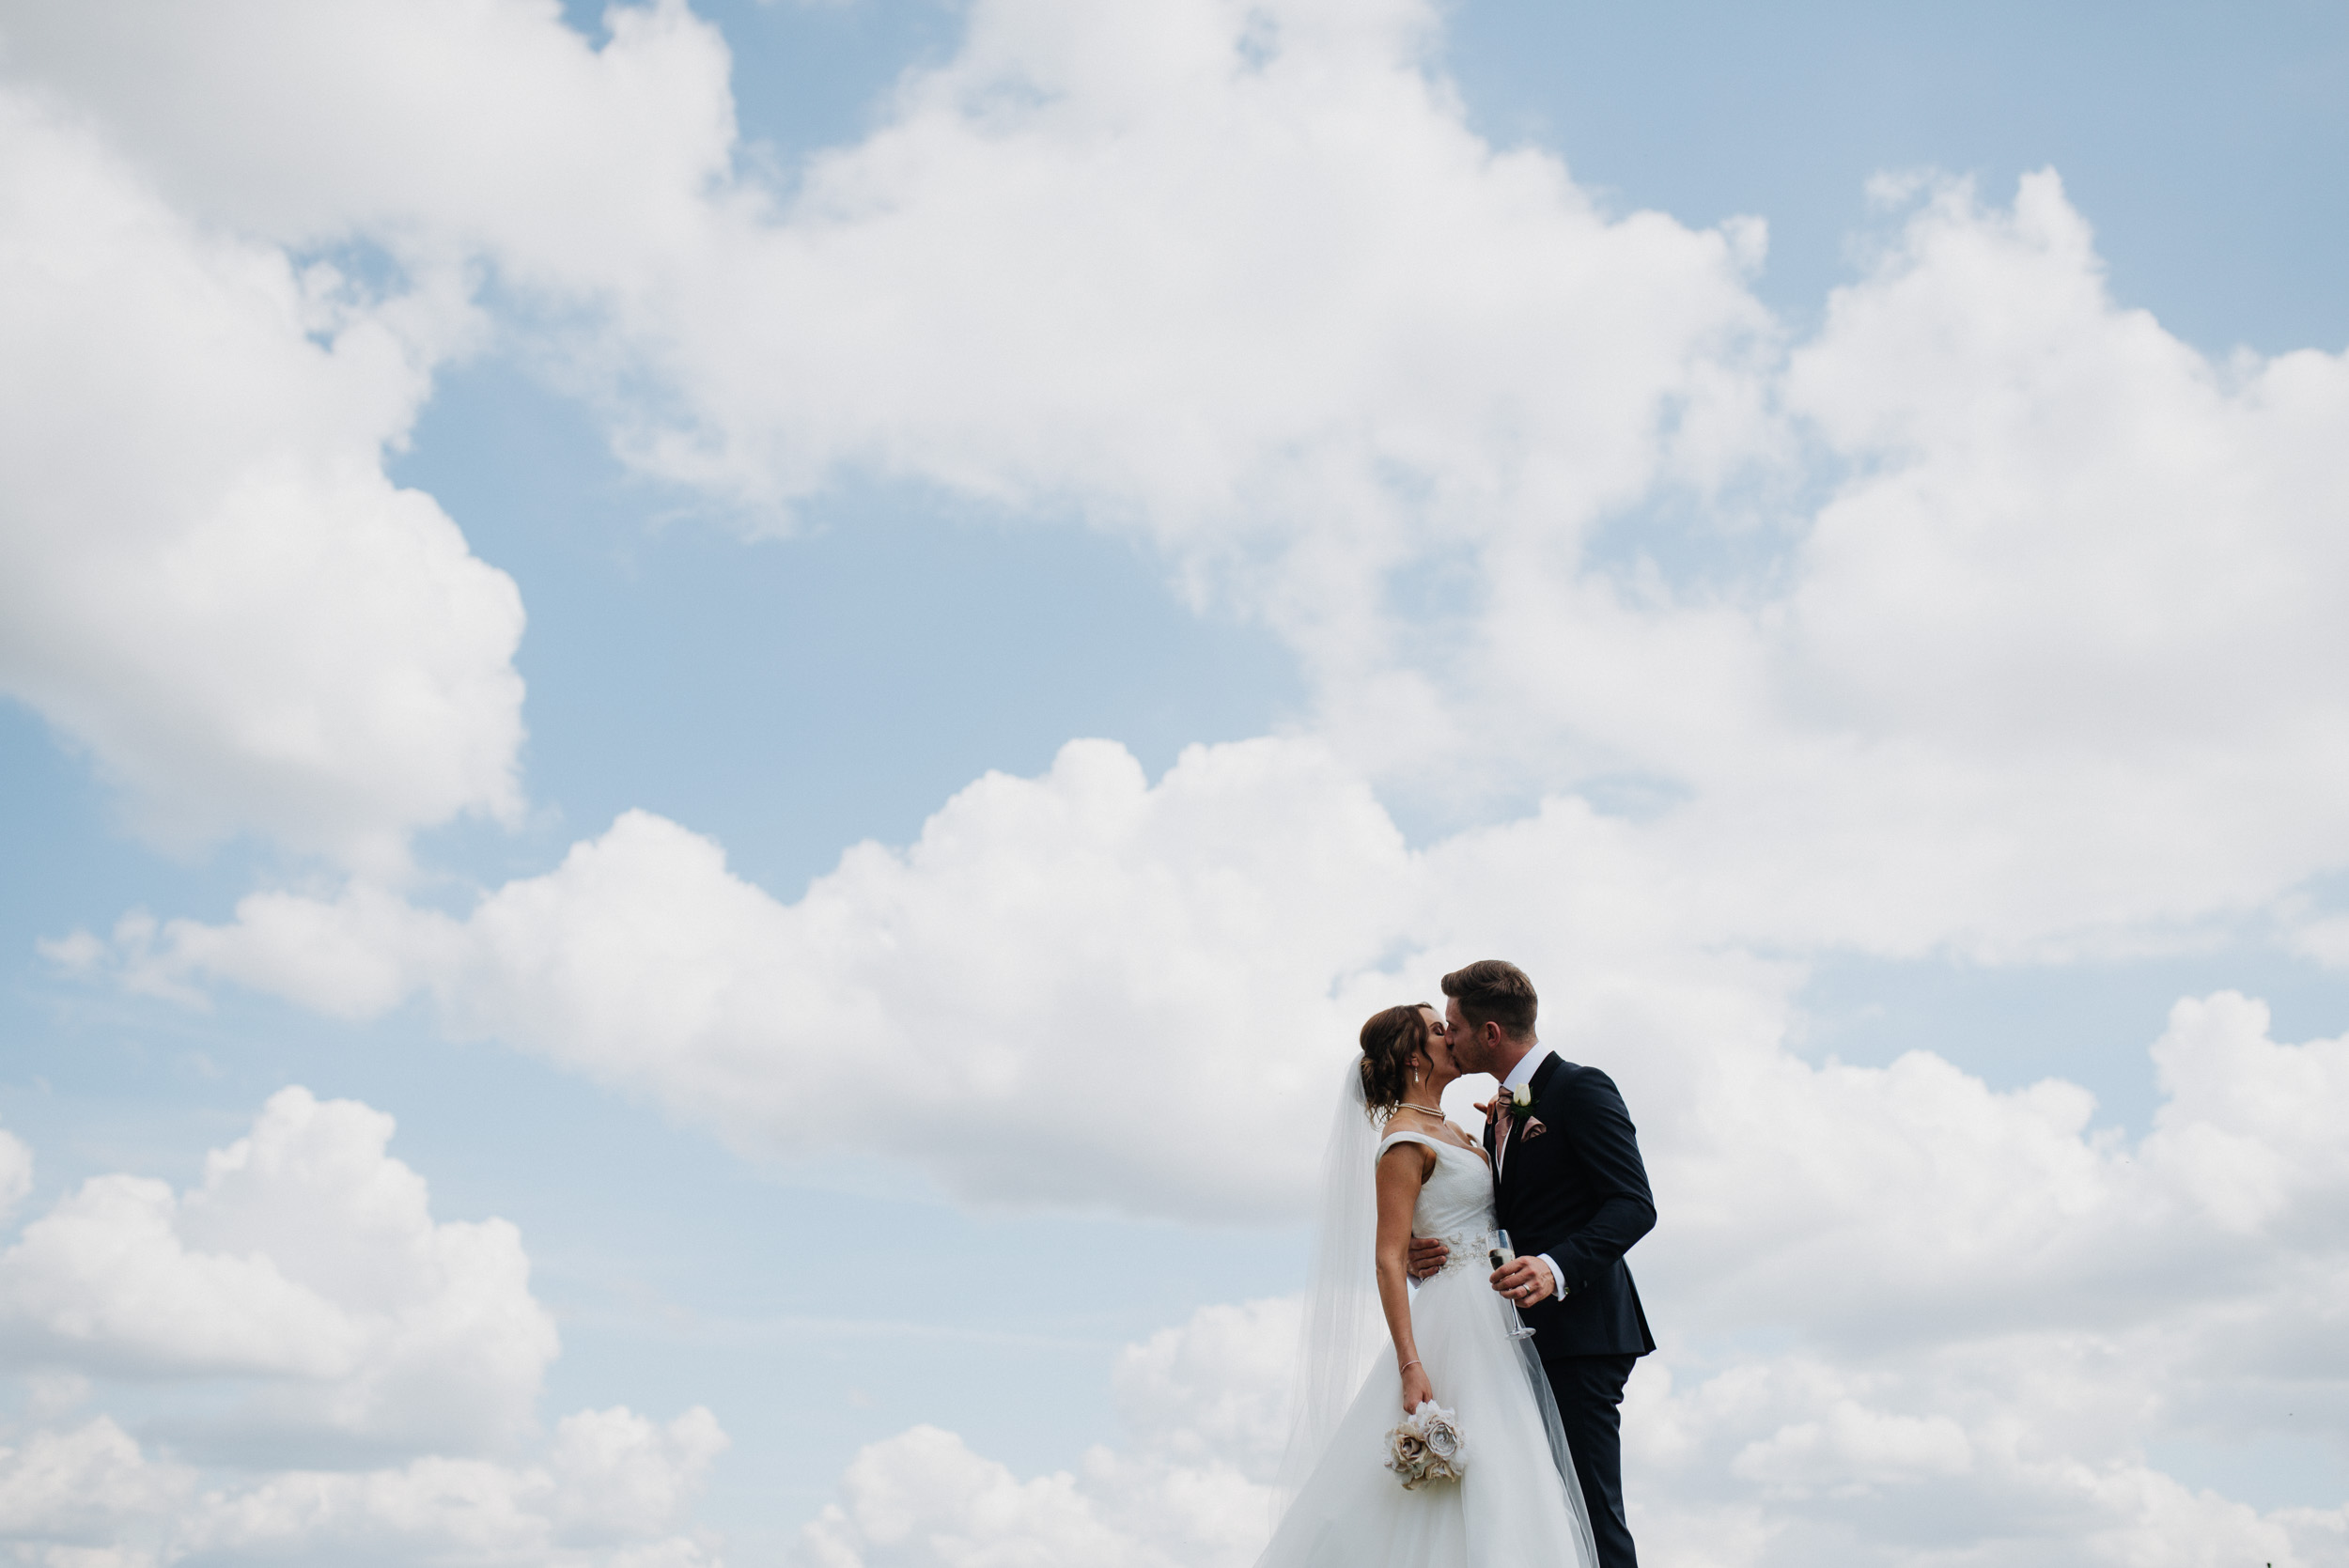 married couple portrait shoot in the clouds